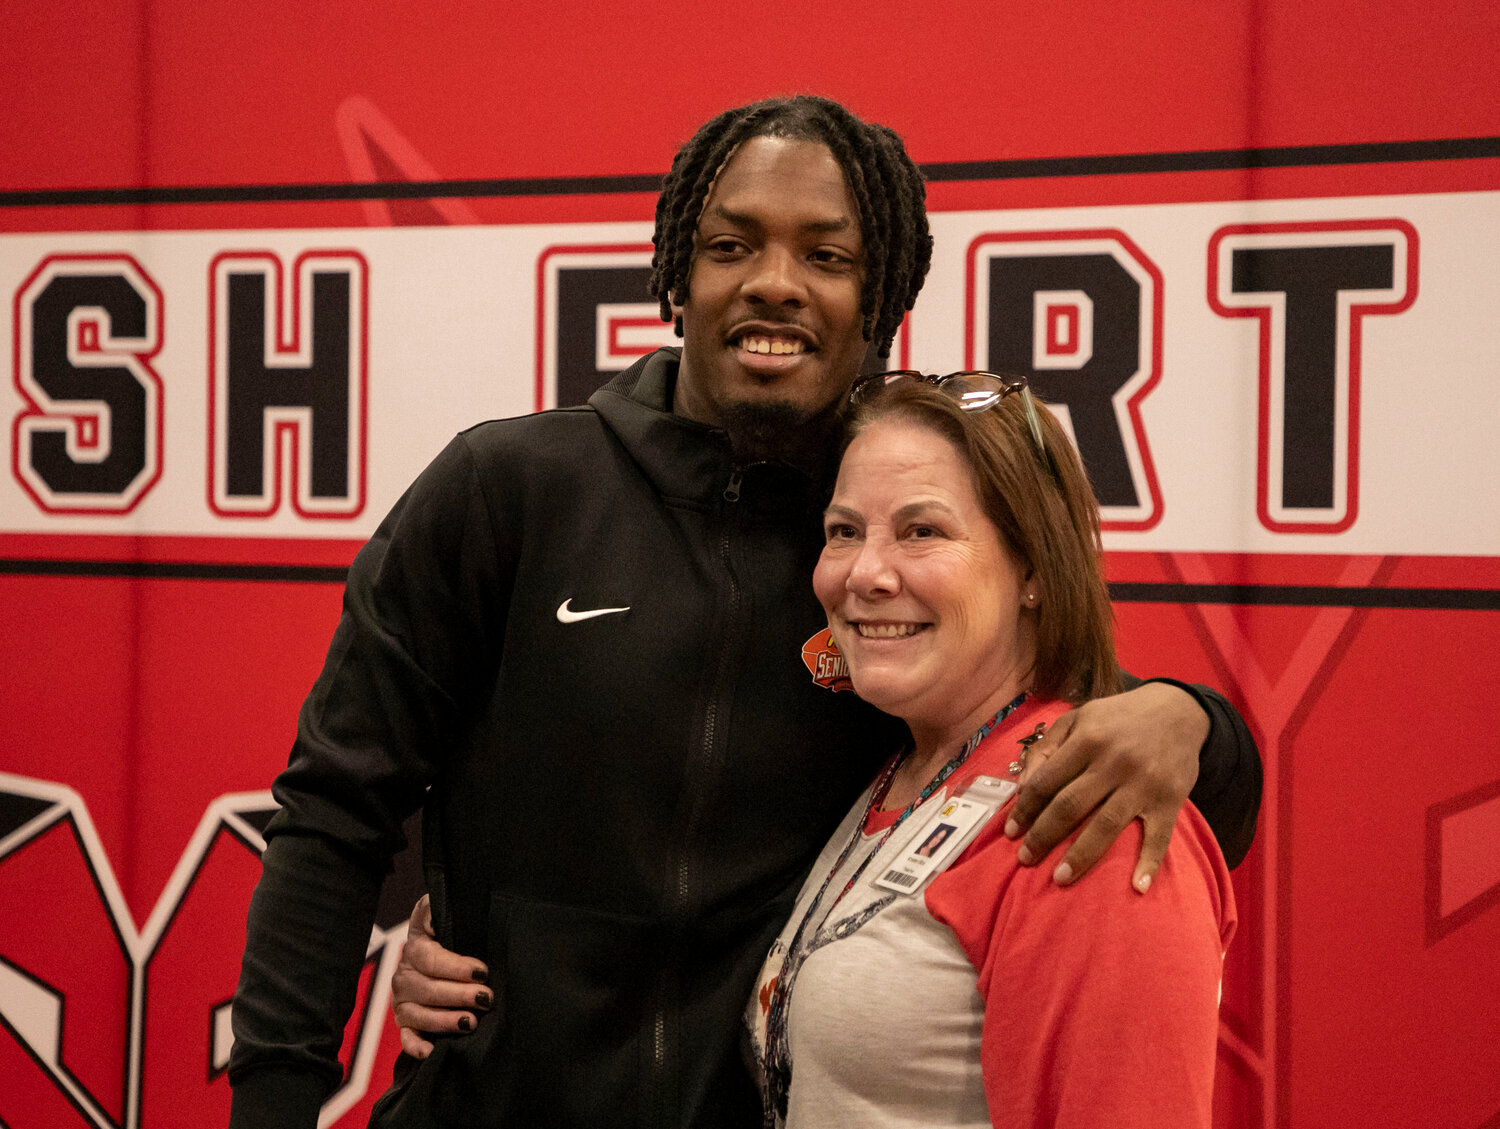 DJ James shares an embrace with Spanish Fort teacher Kristen Box who was on hand to welcome home the former Toro as he prepares for the NFL Draft at the Senior Bowl. James was joined by a fellow Spanish Fort alum in Kris Abrams-Draine in returning to their old stomping grounds on Friday, Feb. 2.